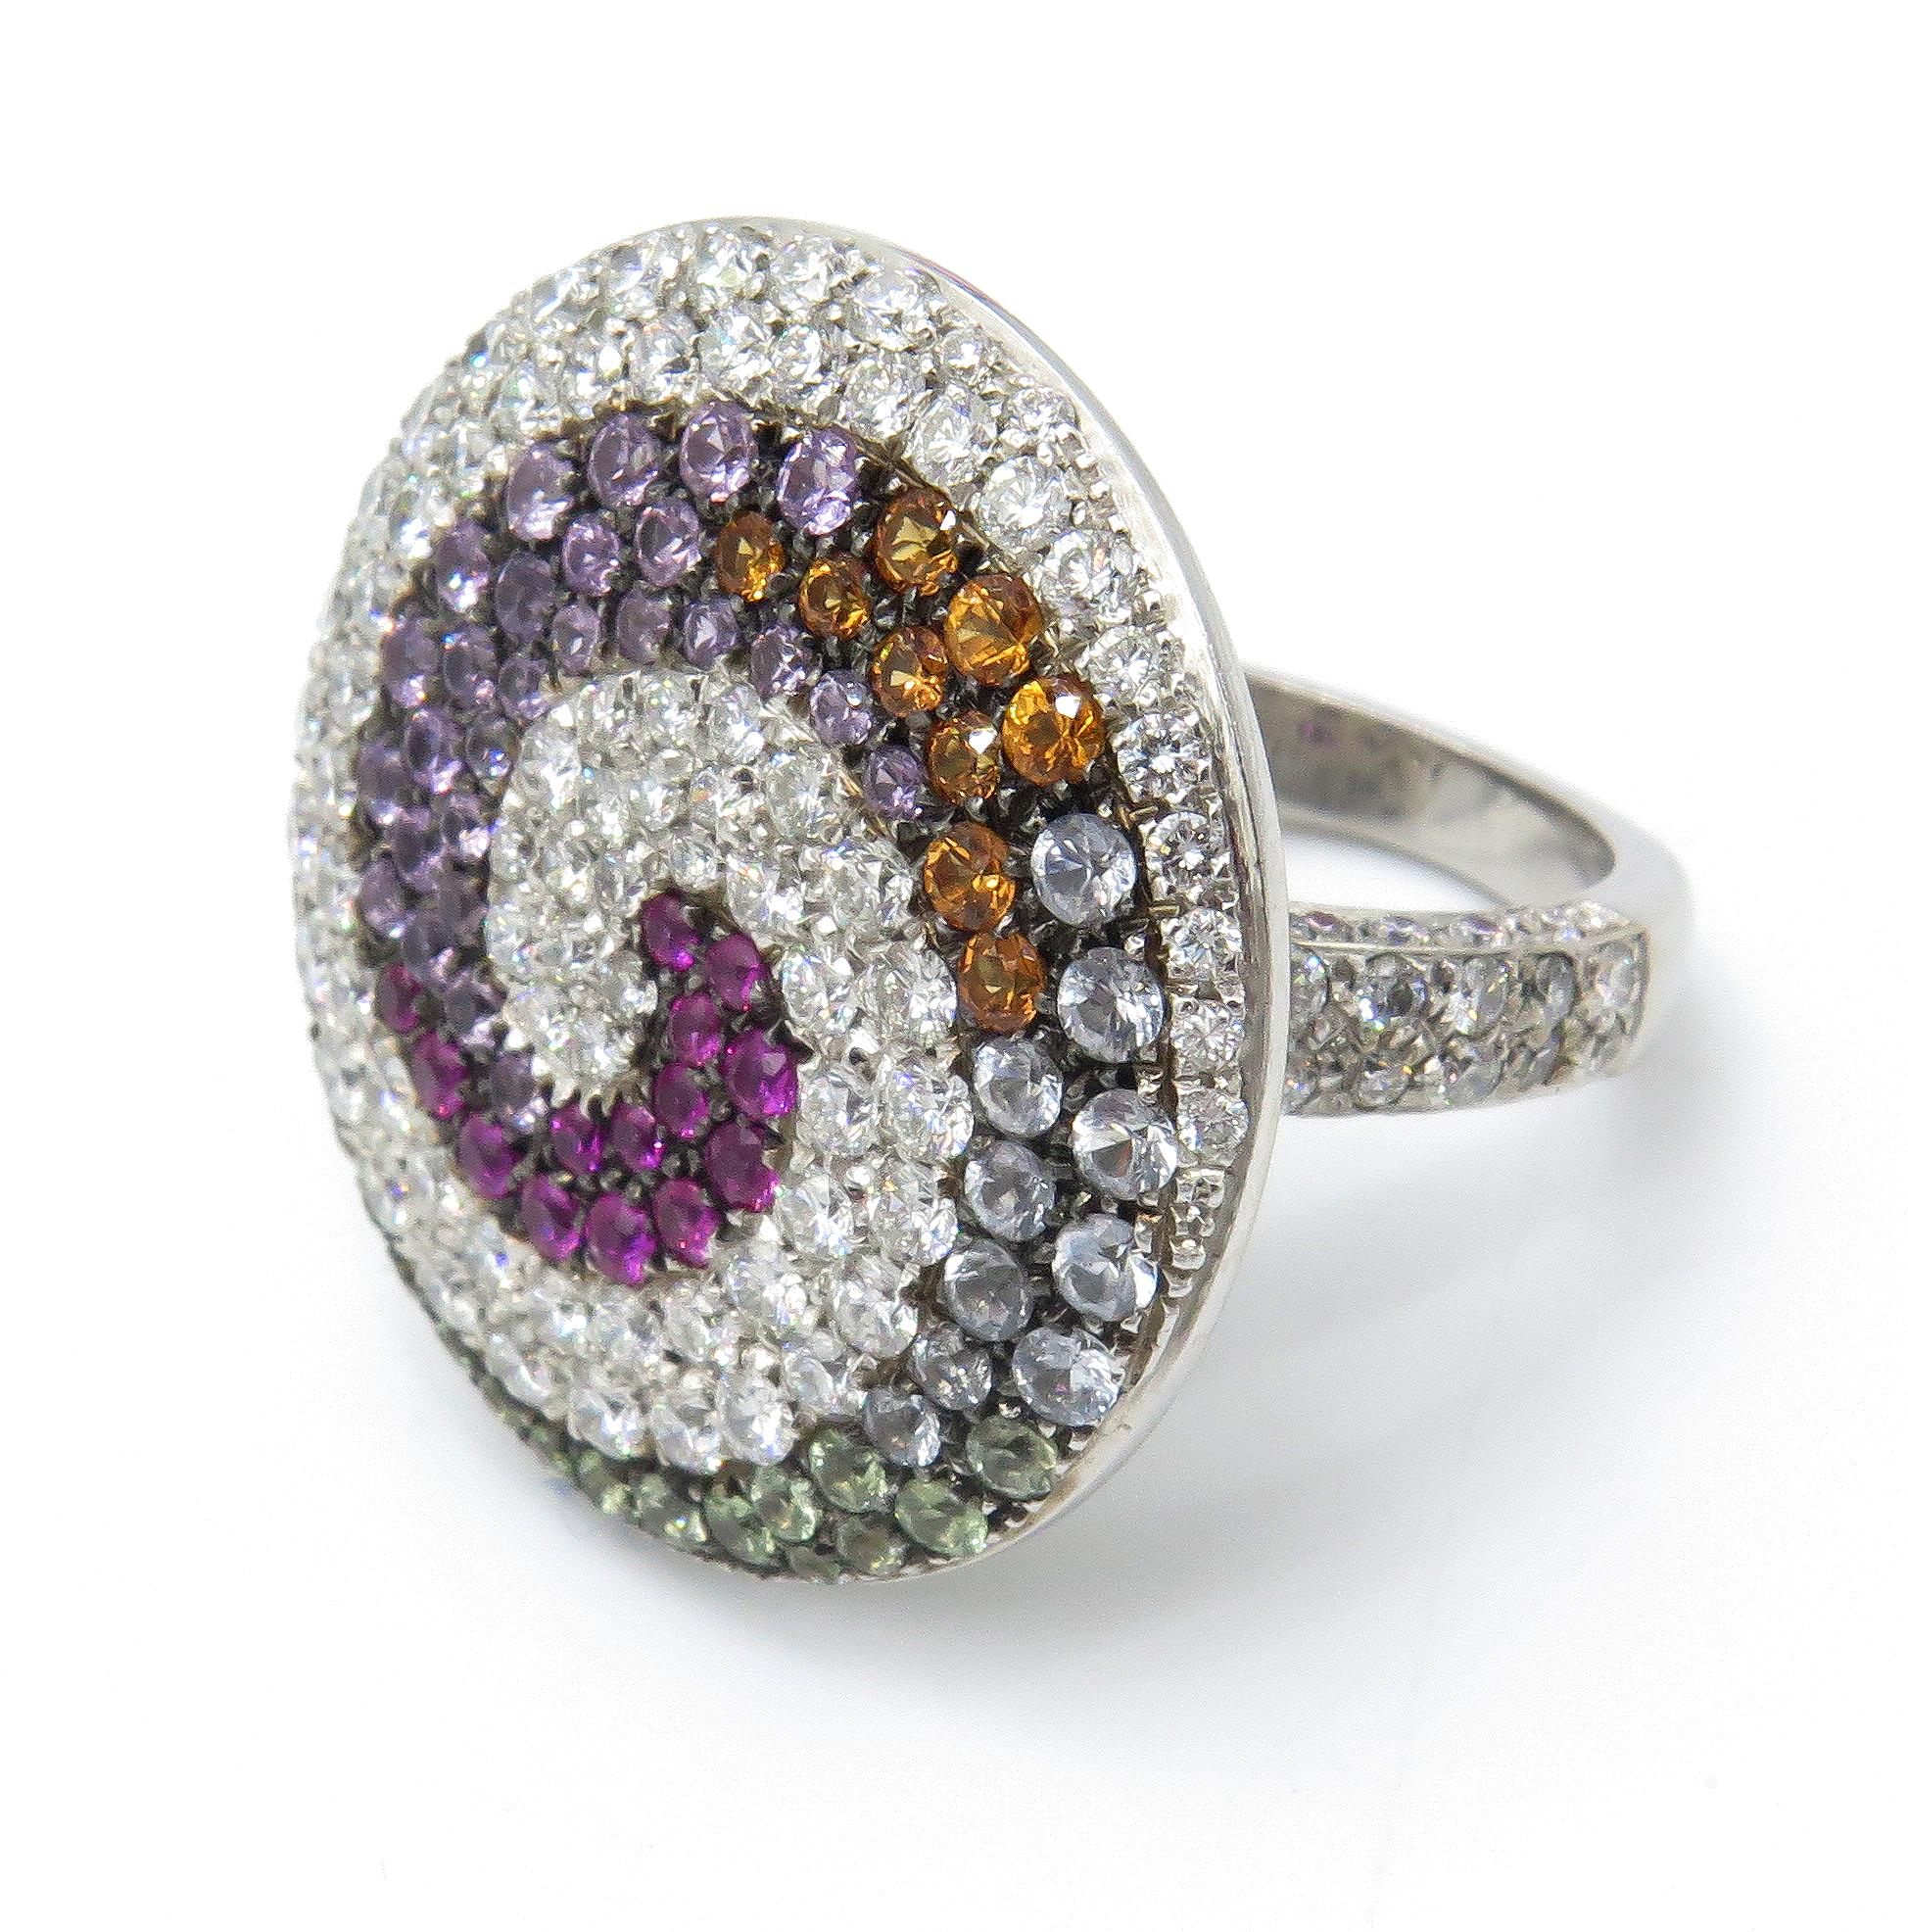 18K White Gold Valente Milano Swirl Ring with pave diamonds and multi-color sapphires. The fascinating arrangement of jewels that embellish the top of this fabulous ring, combine 2.80 carats of diamonds with a spiral of 2.72 carats of multi-colored